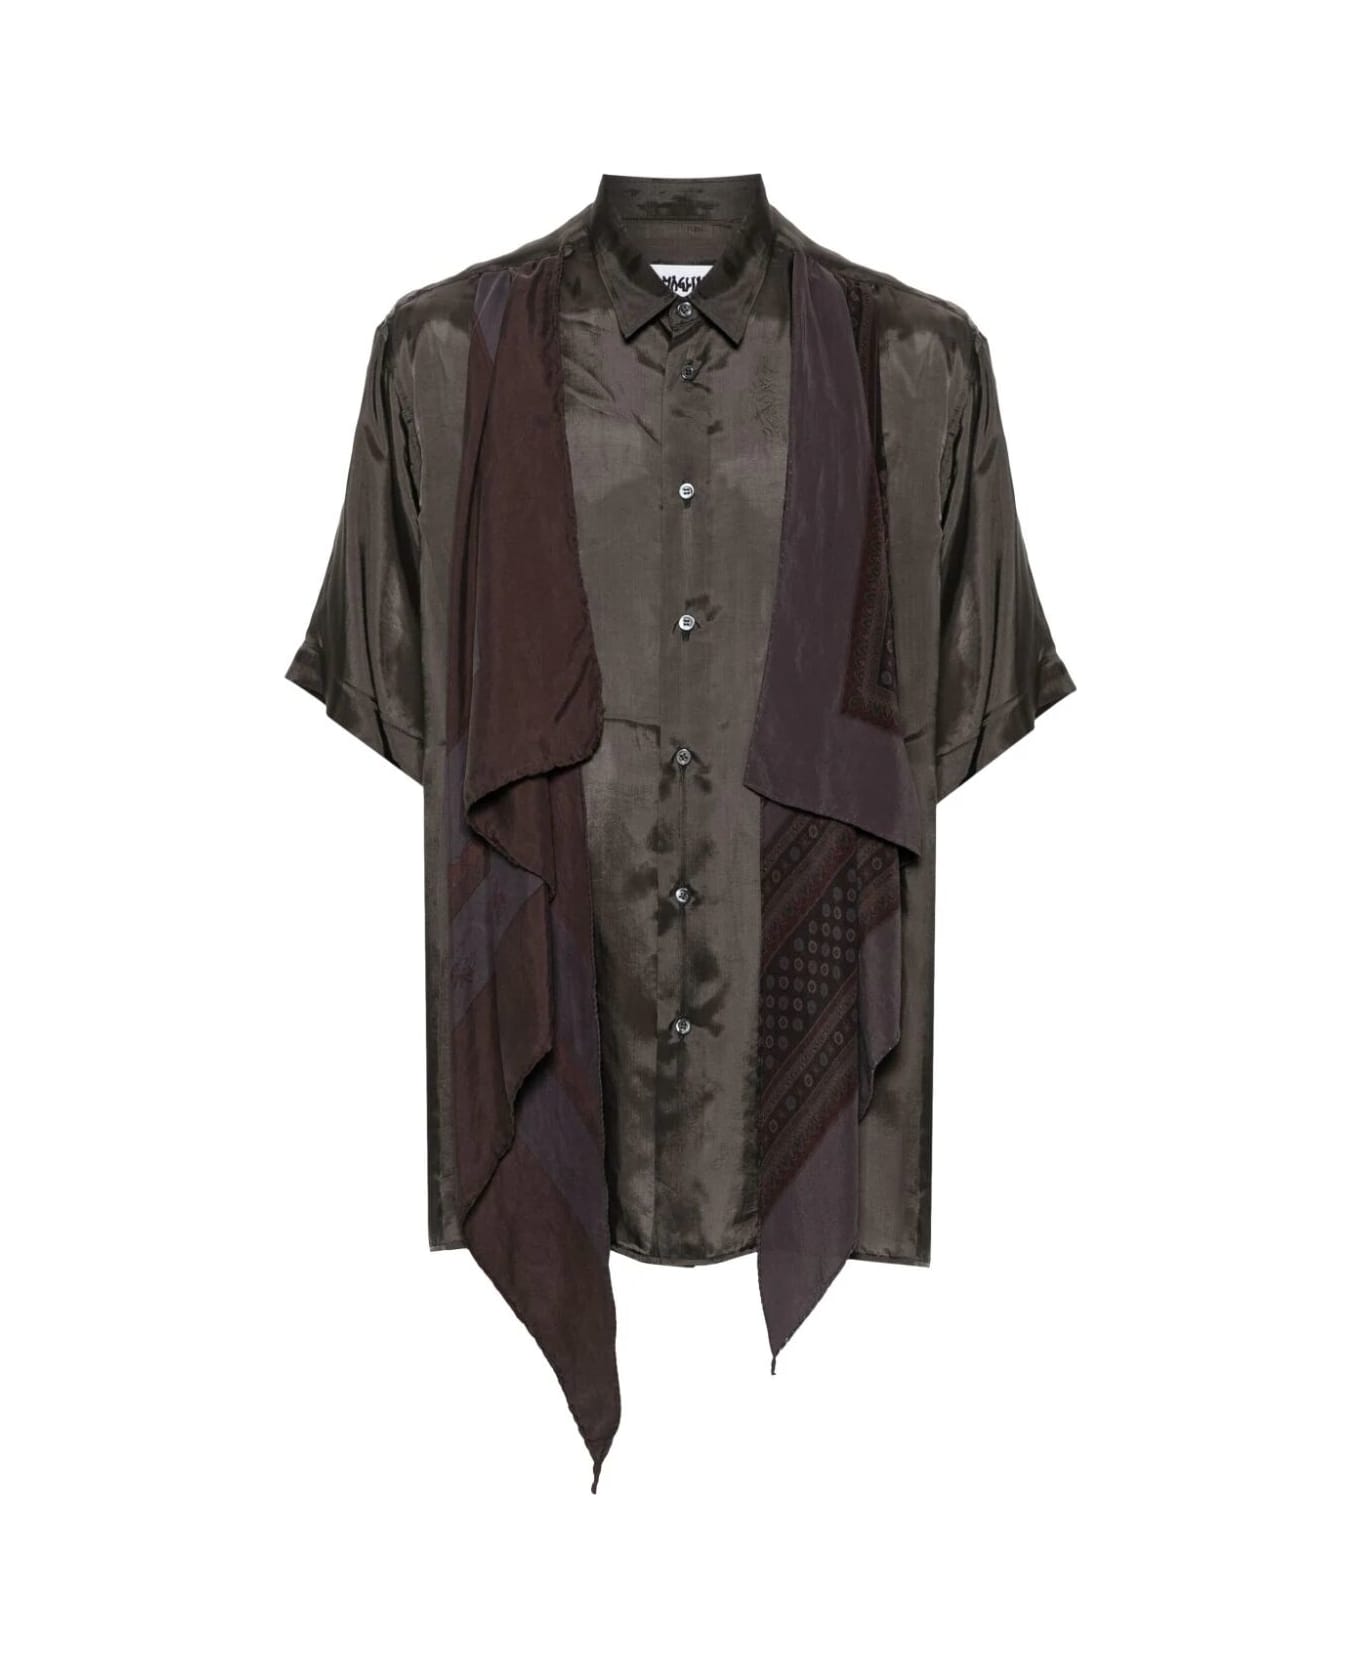 Magliano Pareon Surplus Shirt - Pattern May Change Dpending On The Size - Off Black シャツ